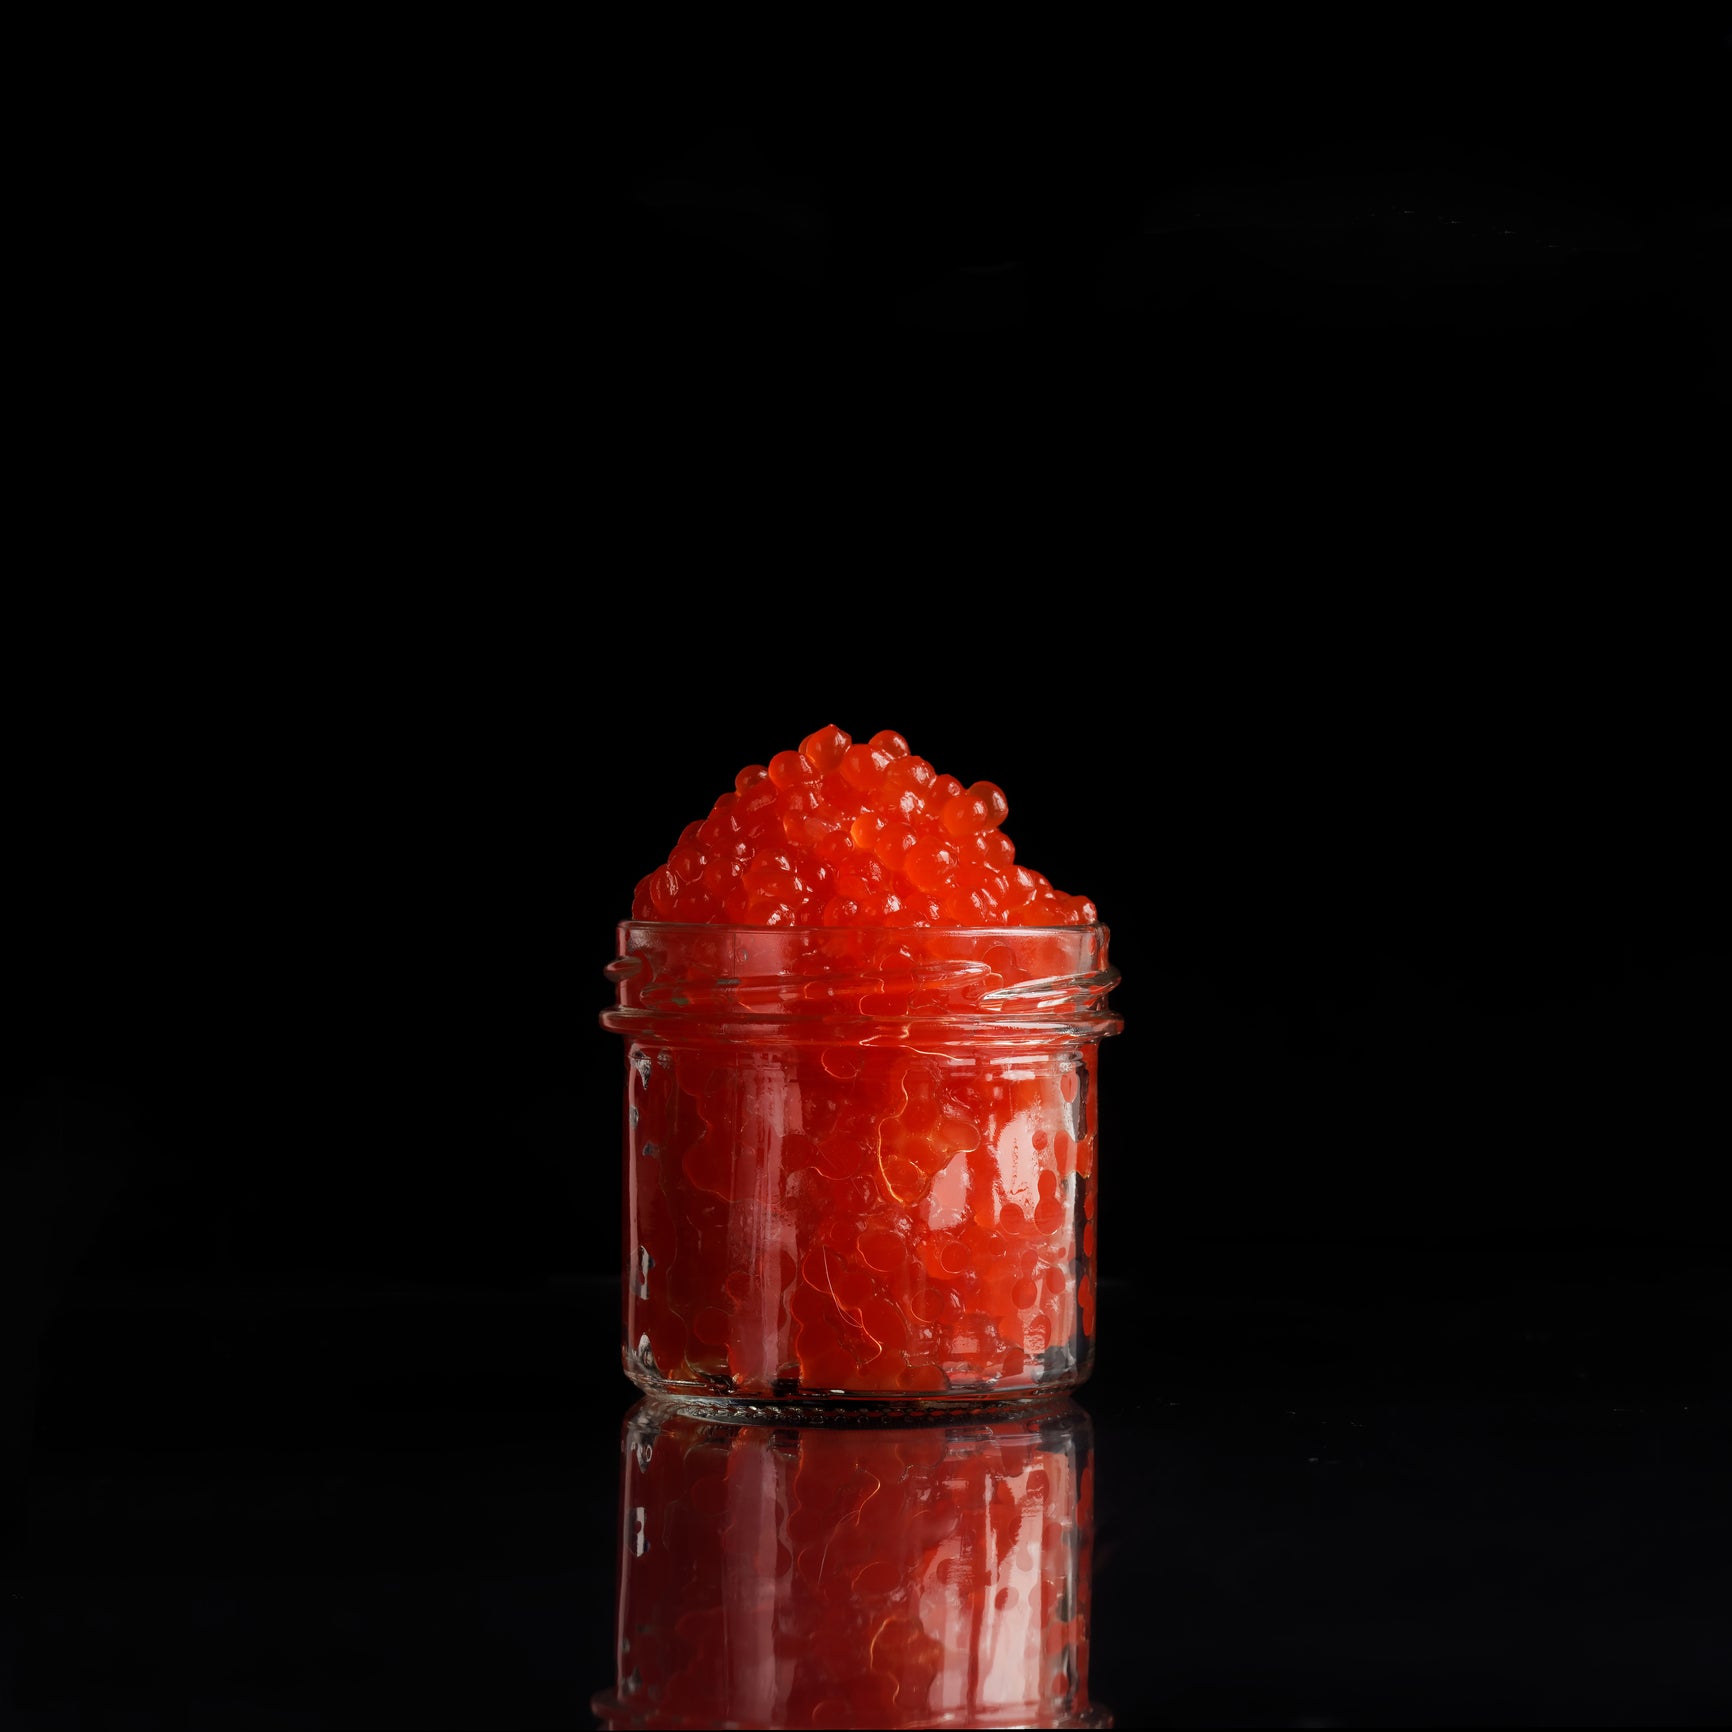 Bowl of fresh salmon roe on ice, displaying the vibrant orange color and glossy texture typical of high-quality ikura